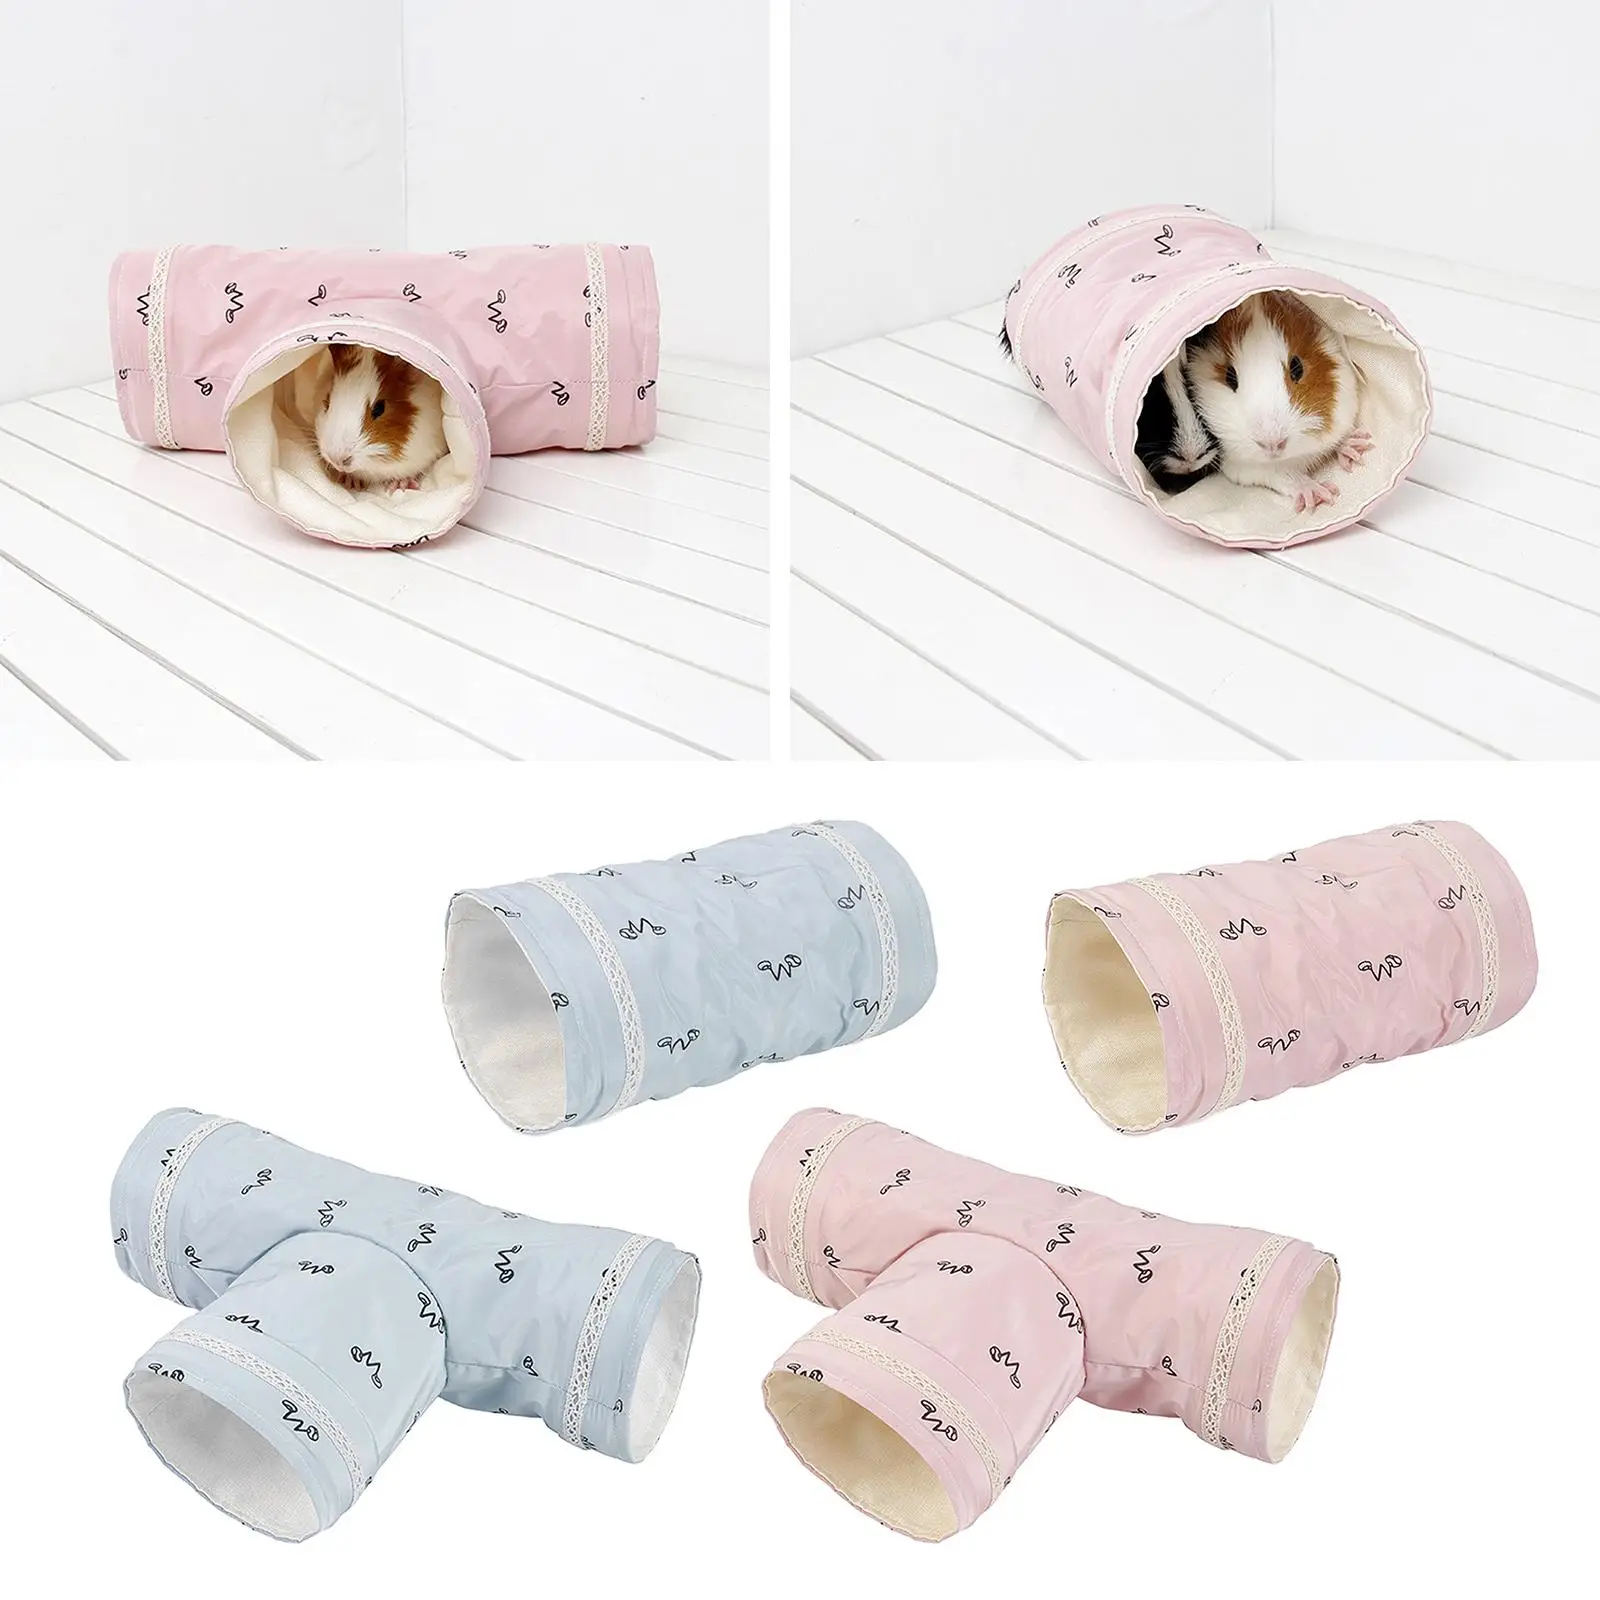 Bunny Tunnels Tubes 2-Way/3-Way Collapsible Bunny Hideout Small Animal Activity Tunnel Toys for Dwarf Rabbits Guinea Pigs Kitty